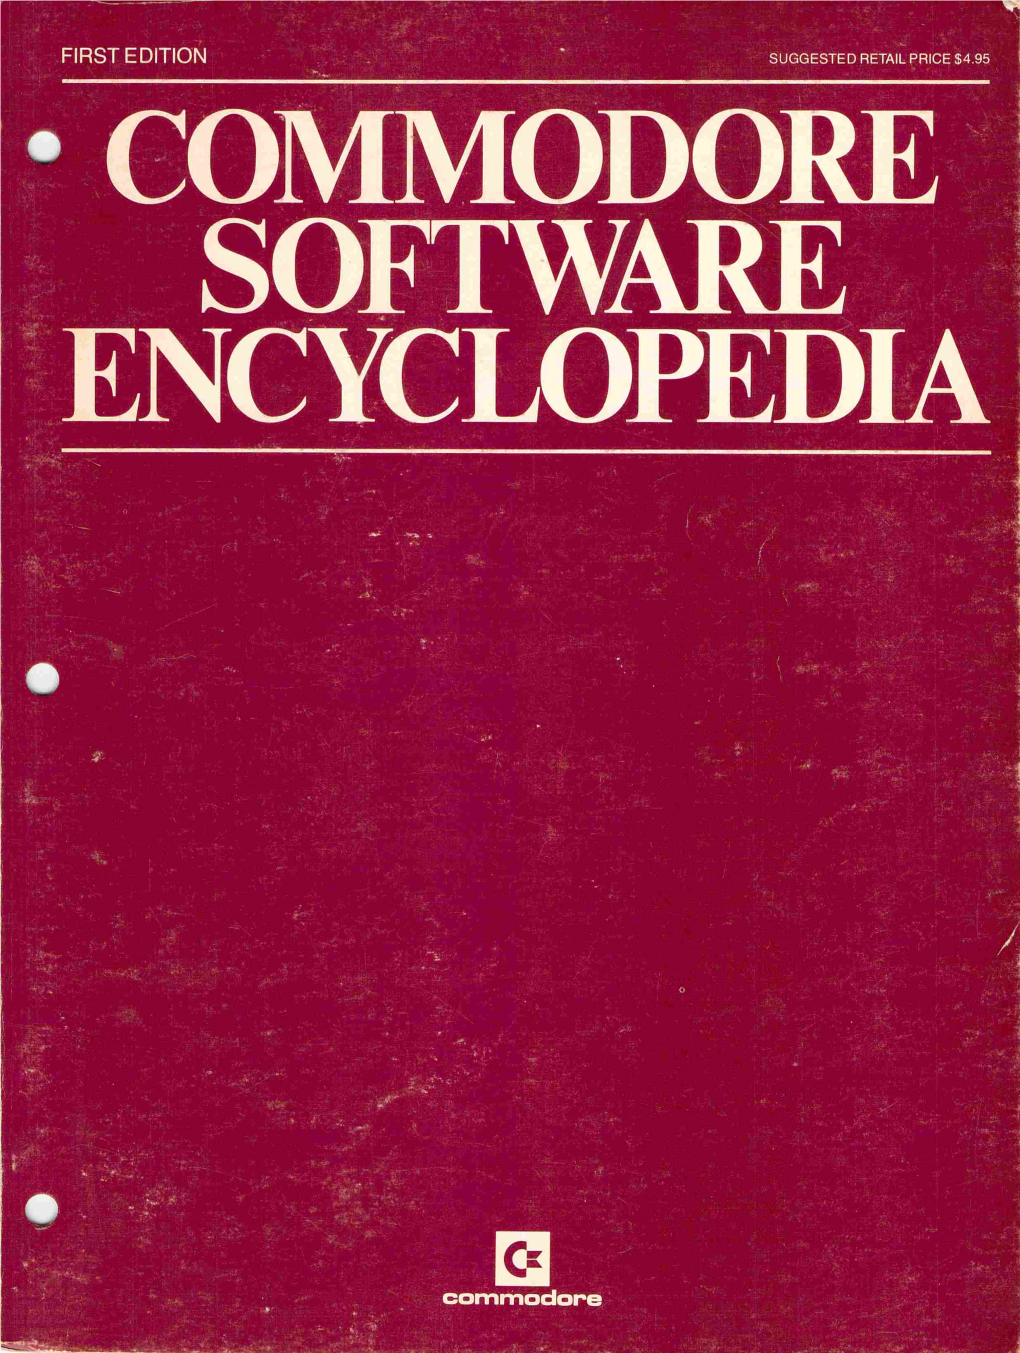 Commodore Software Encyclope